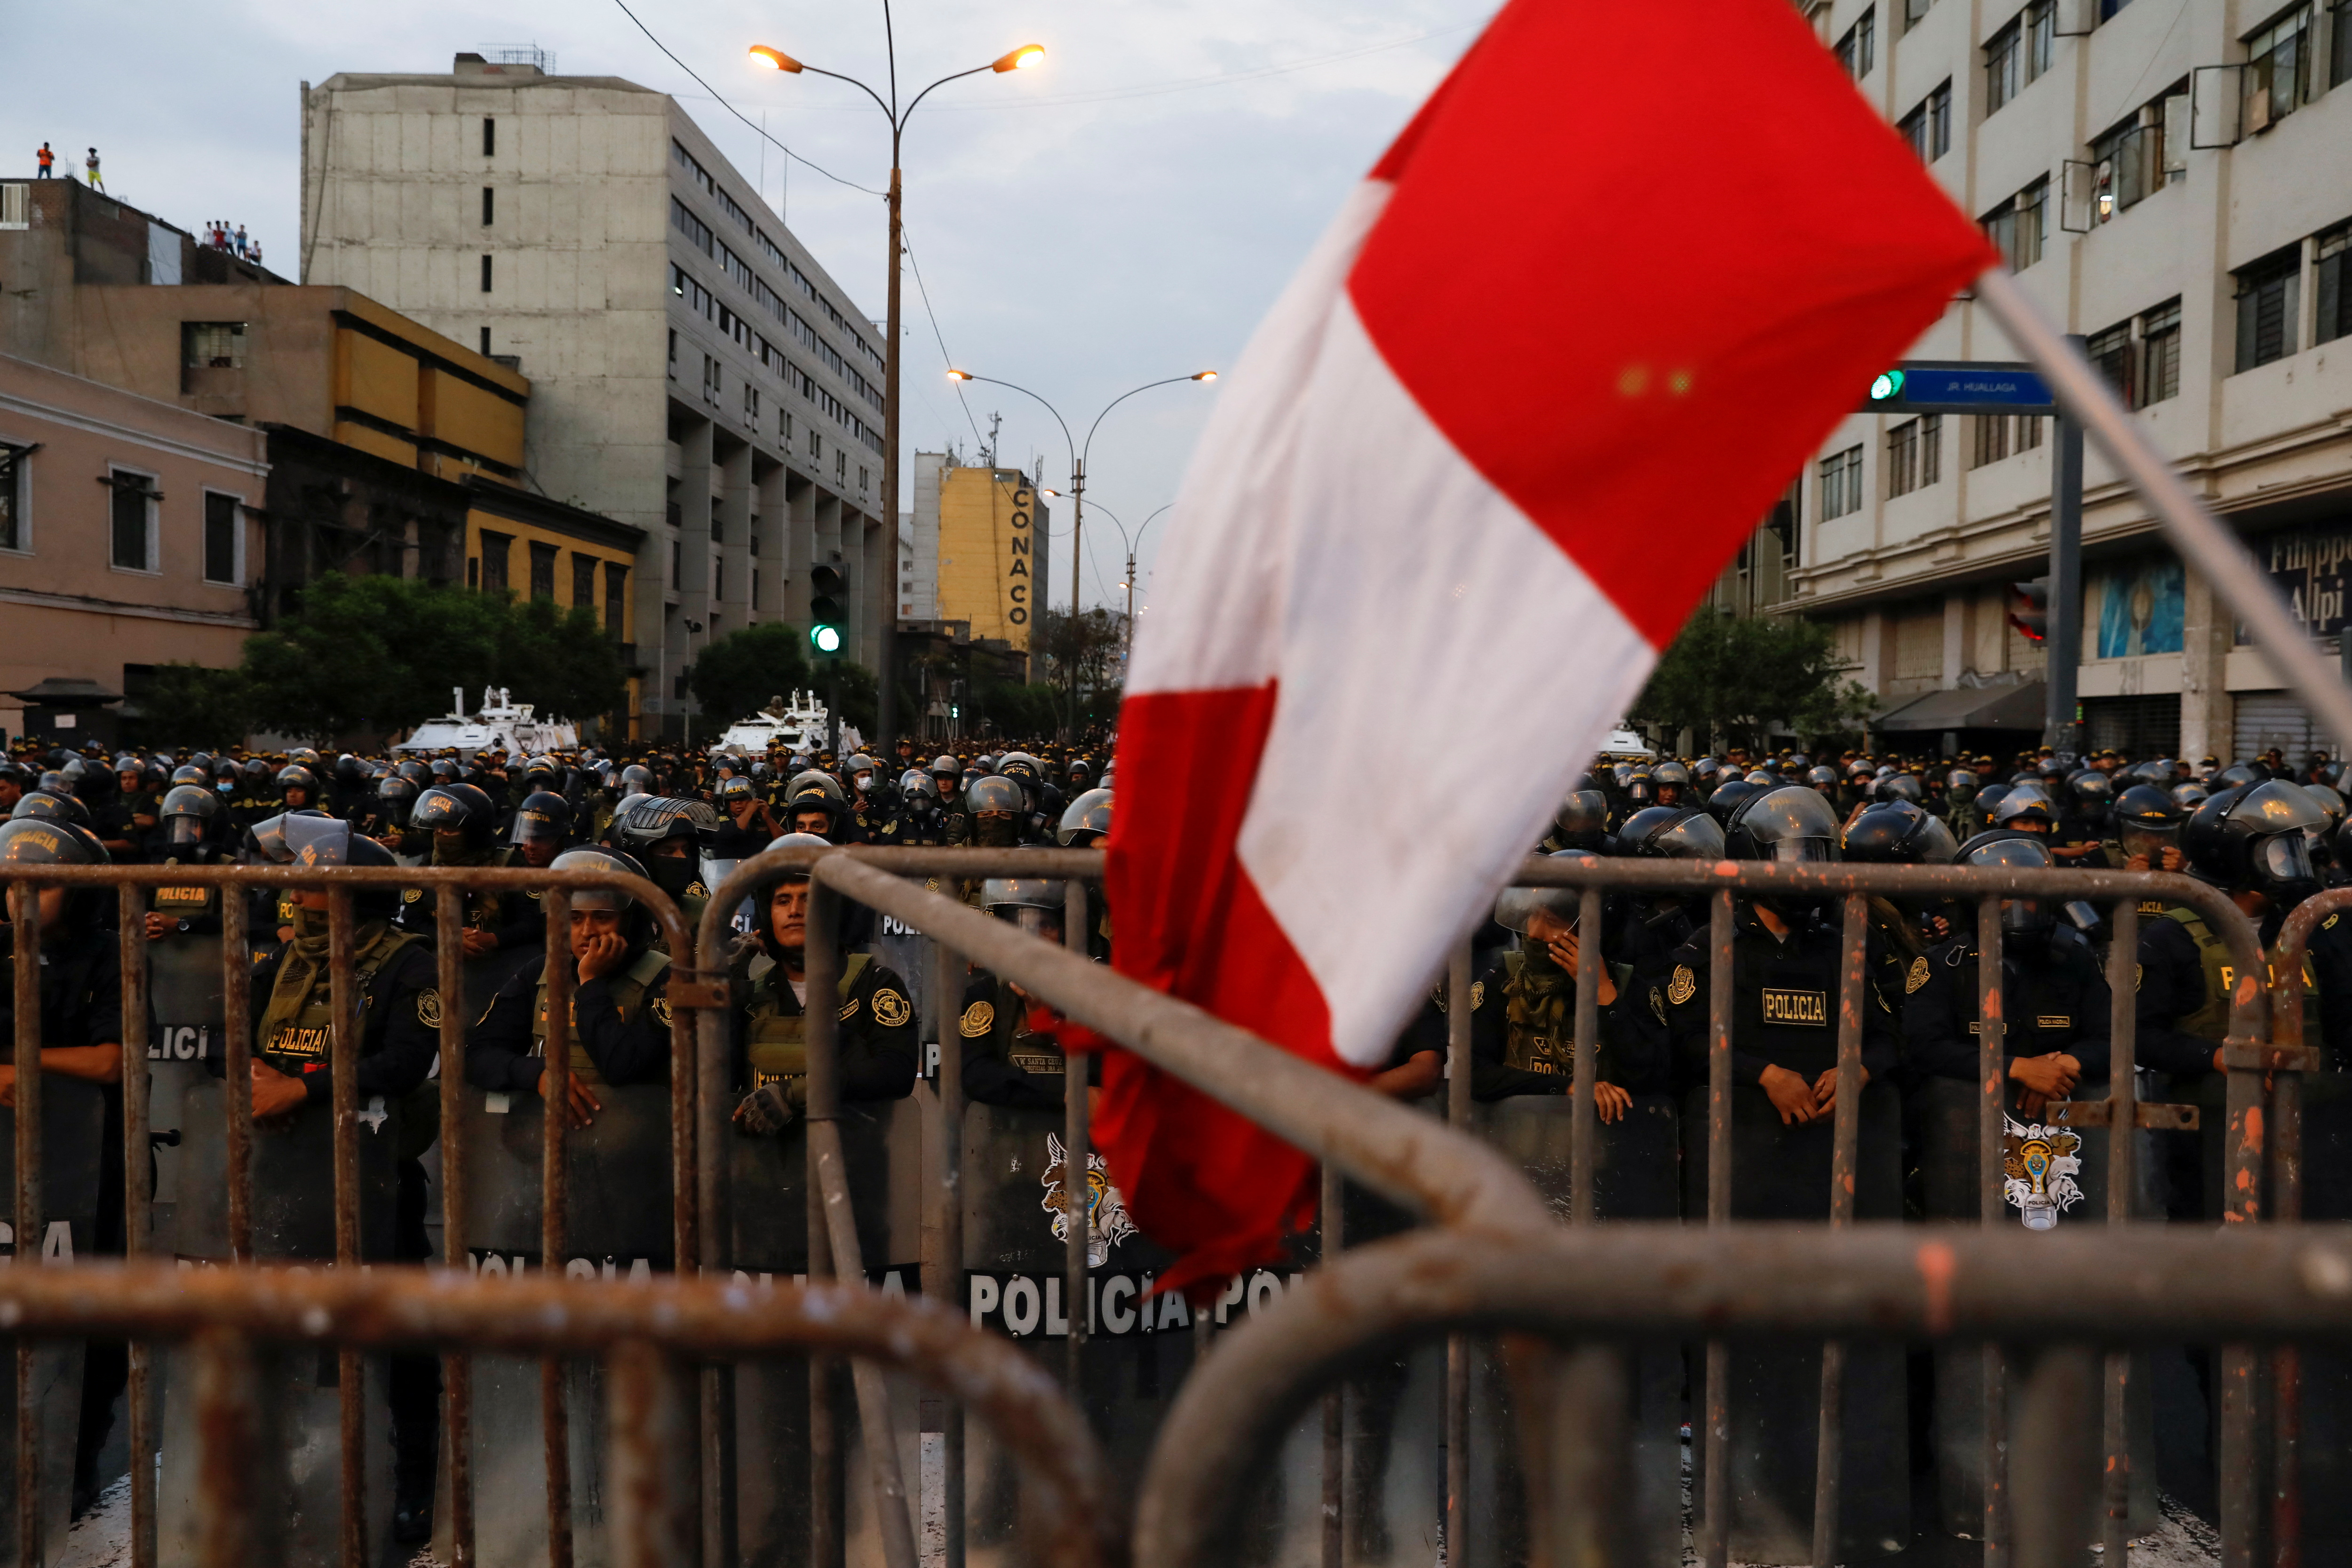 Riot police officers stand guard during a protest to demand Peru's President Dina Boluarte to step down, in Lima, Peru, January 31, 2023. REUTERS/Alessandro Cinque